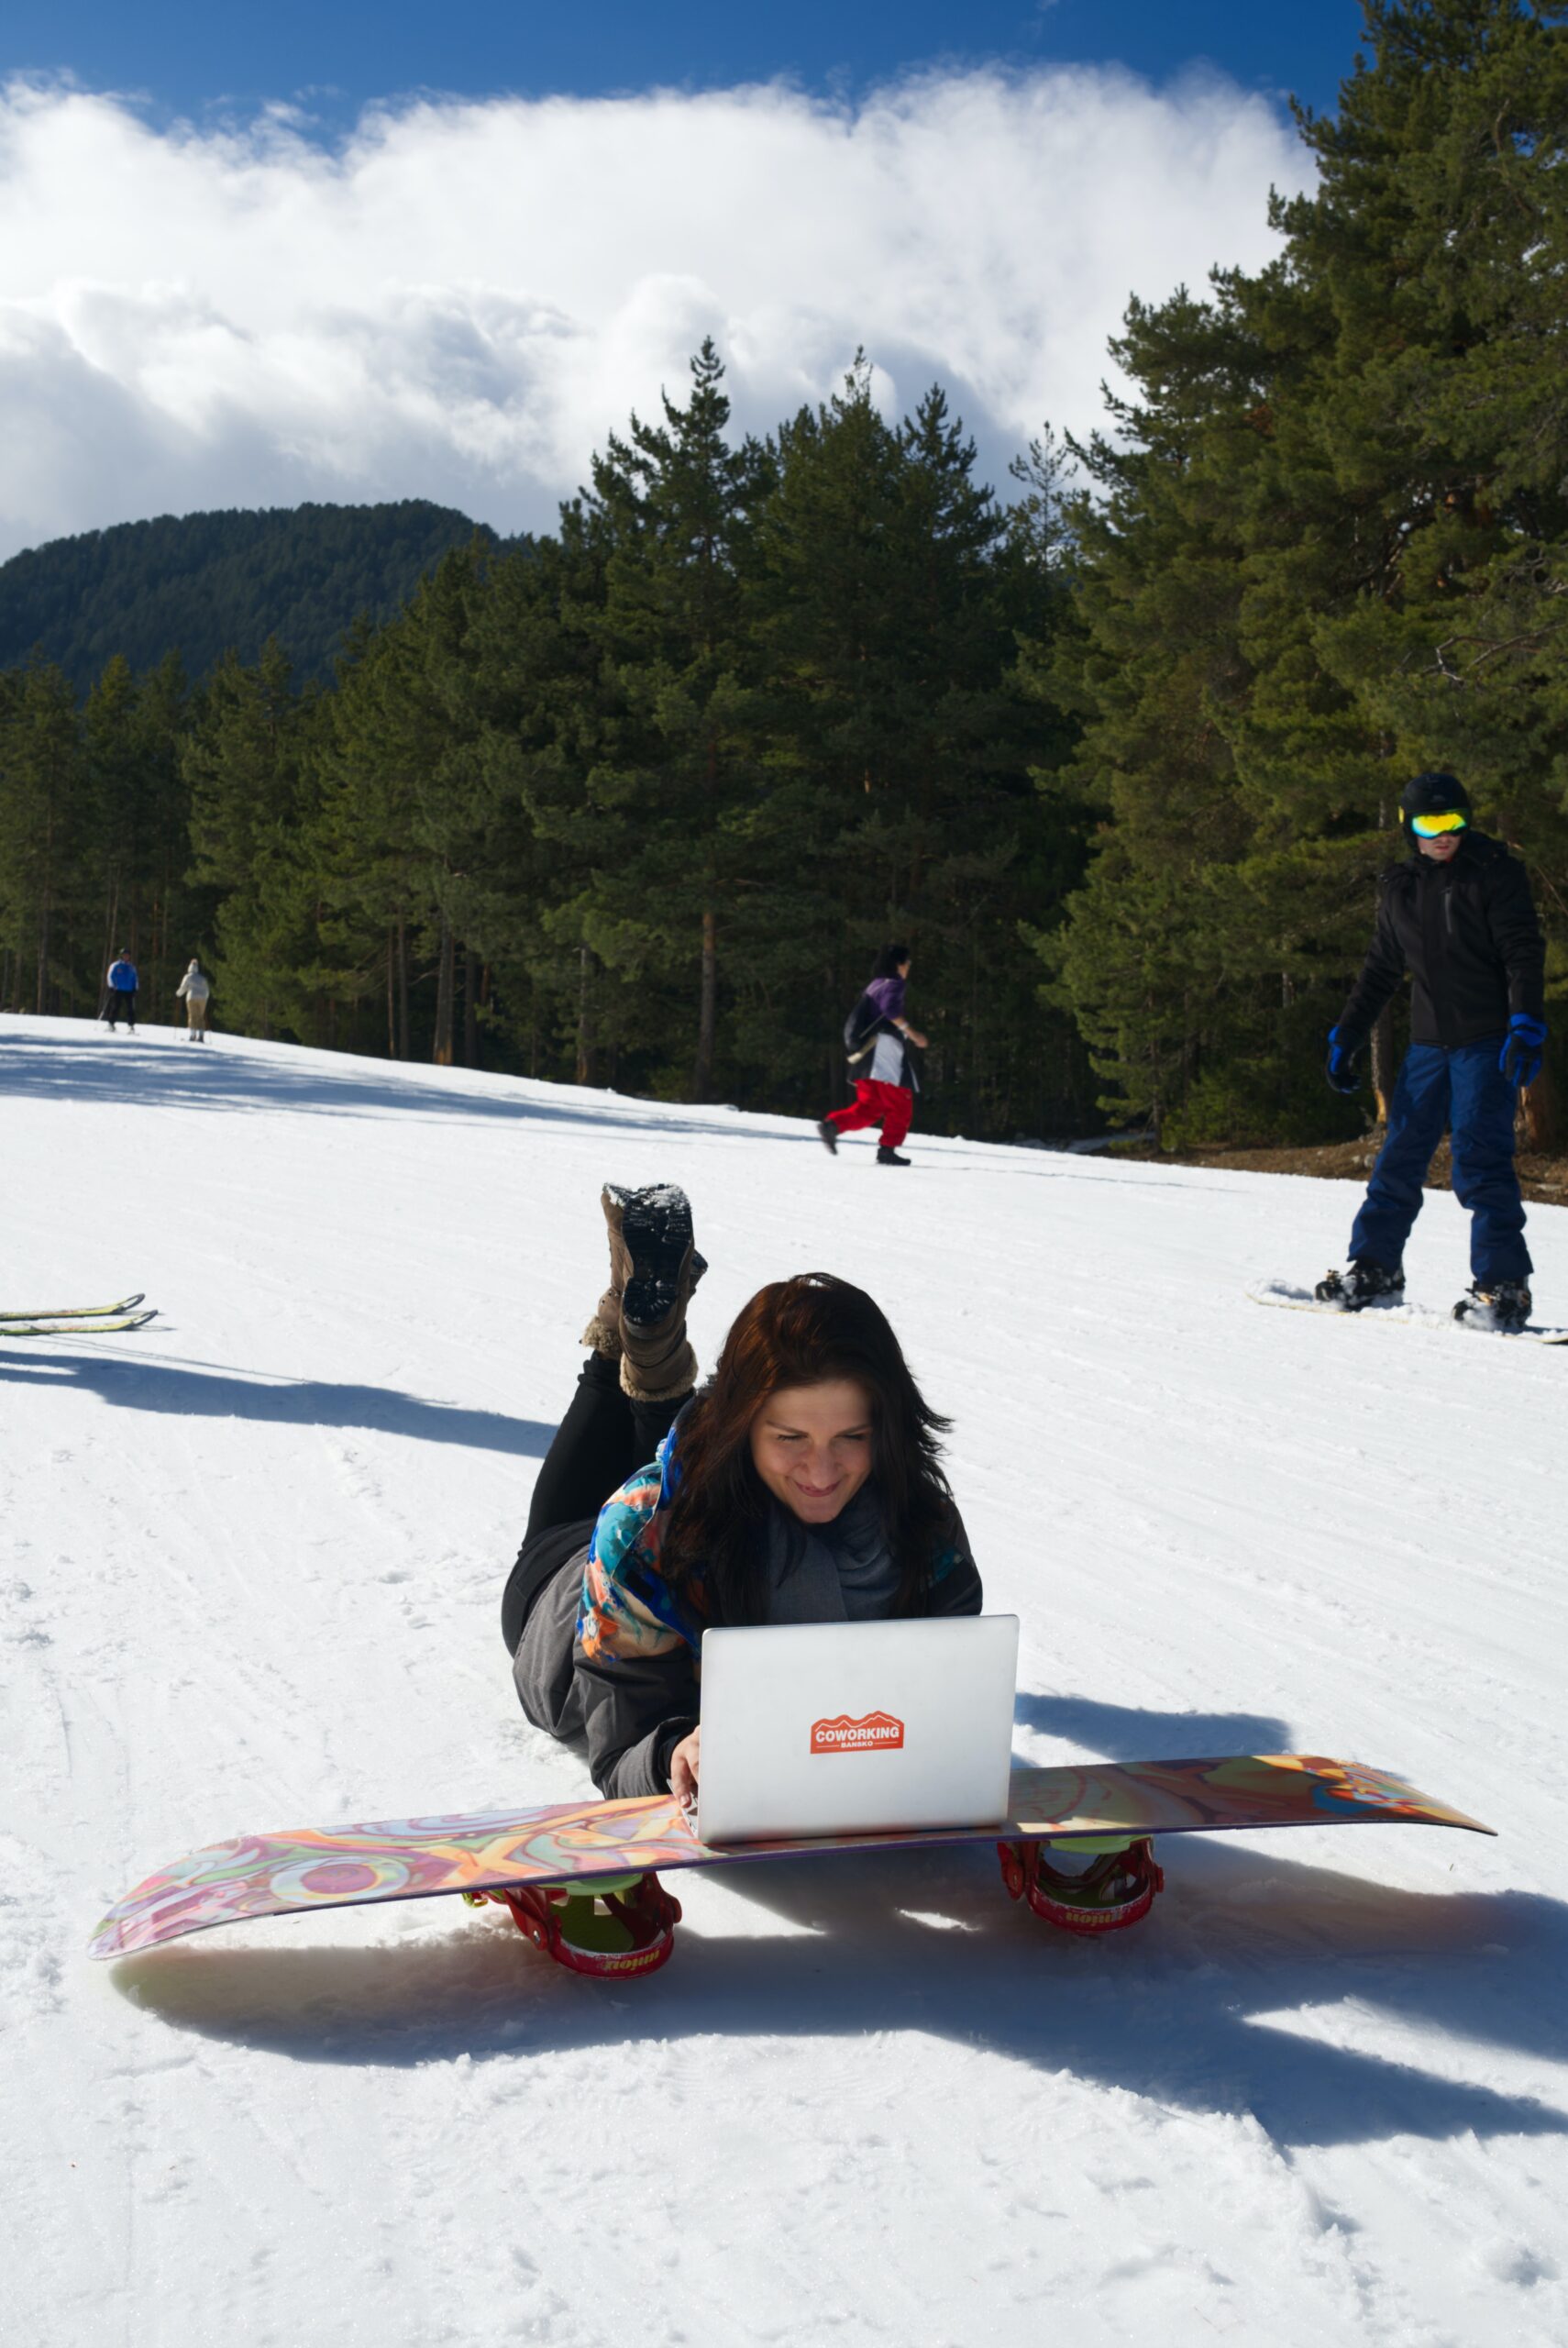 Photo by Coworking Bansko: https://www.pexels.com/photo/woman-lying-on-front-on-snow-using-laptop-4137602/